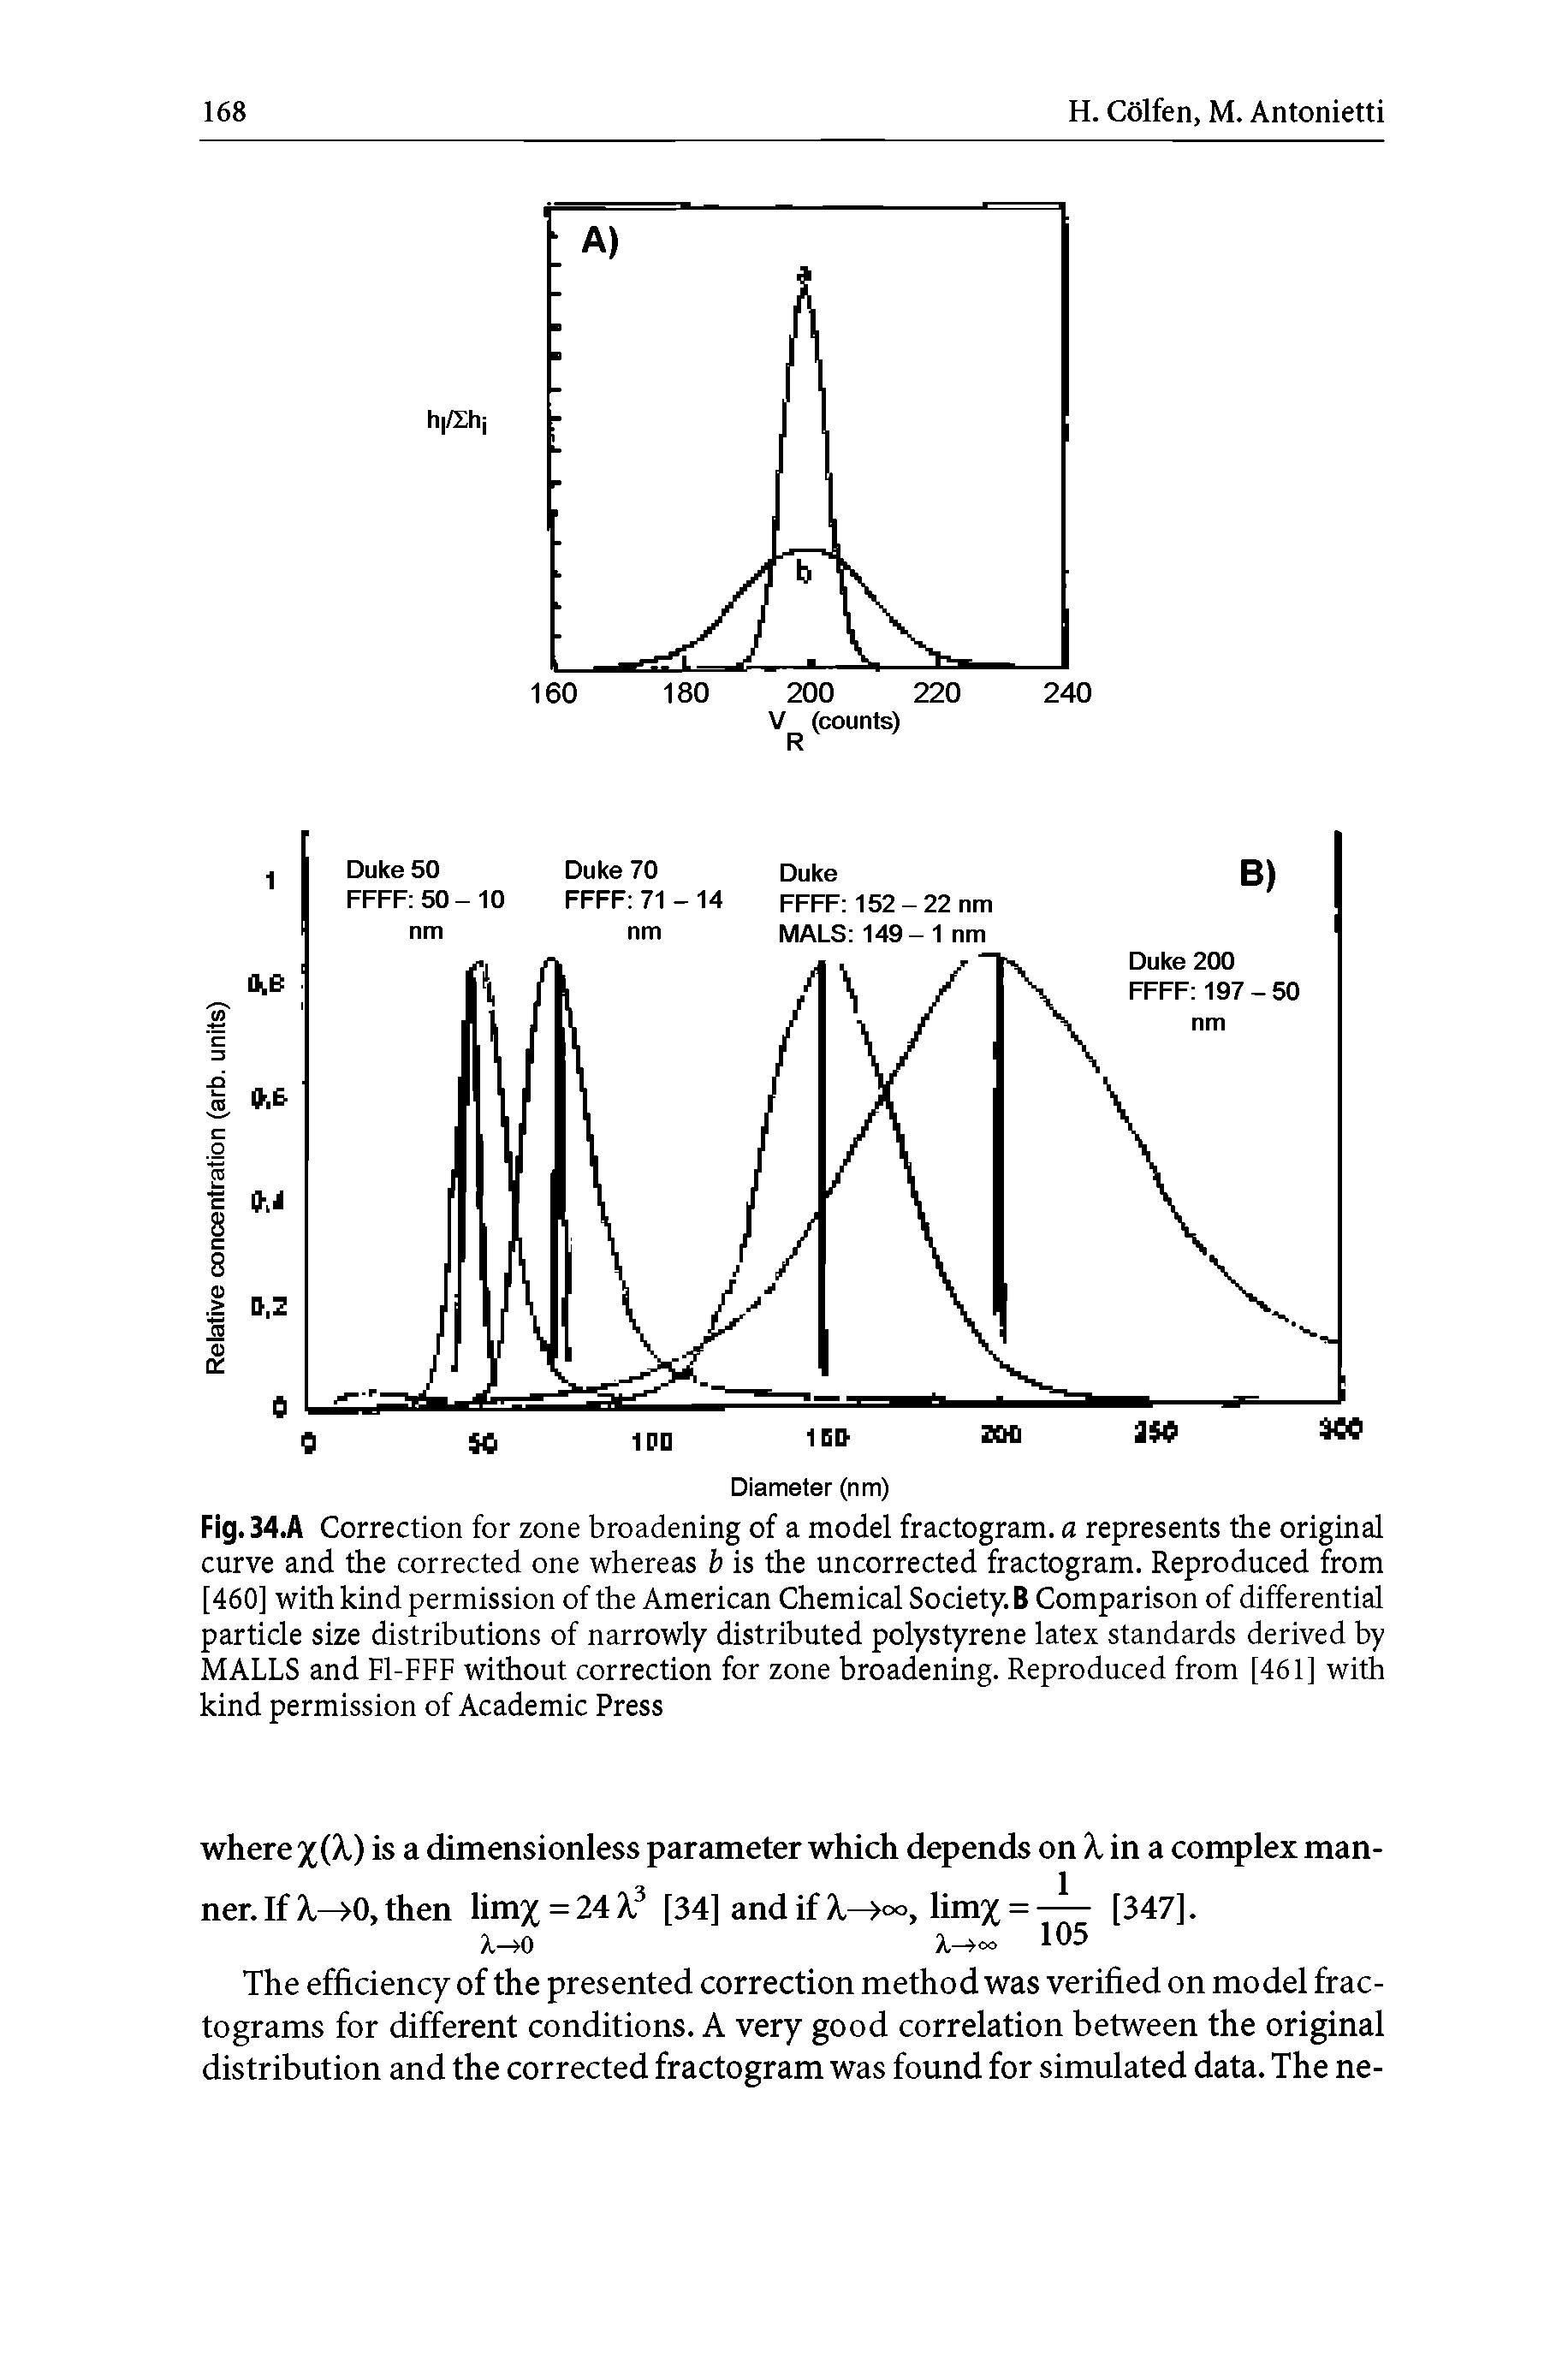 Fig. 34.A Correction for zone broadening of a model fractogram. a represents the original curve and the corrected one whereas b is the uncorrected fractogram. Reproduced from [460] with kind permission of the American Chemical Society. B Comparison of differential particle size distributions of narrowly distributed polystyrene latex standards derived by MALLS and Fl-FFF without correction for zone broadening. Reproduced from [461] with kind permission of Academic Press...